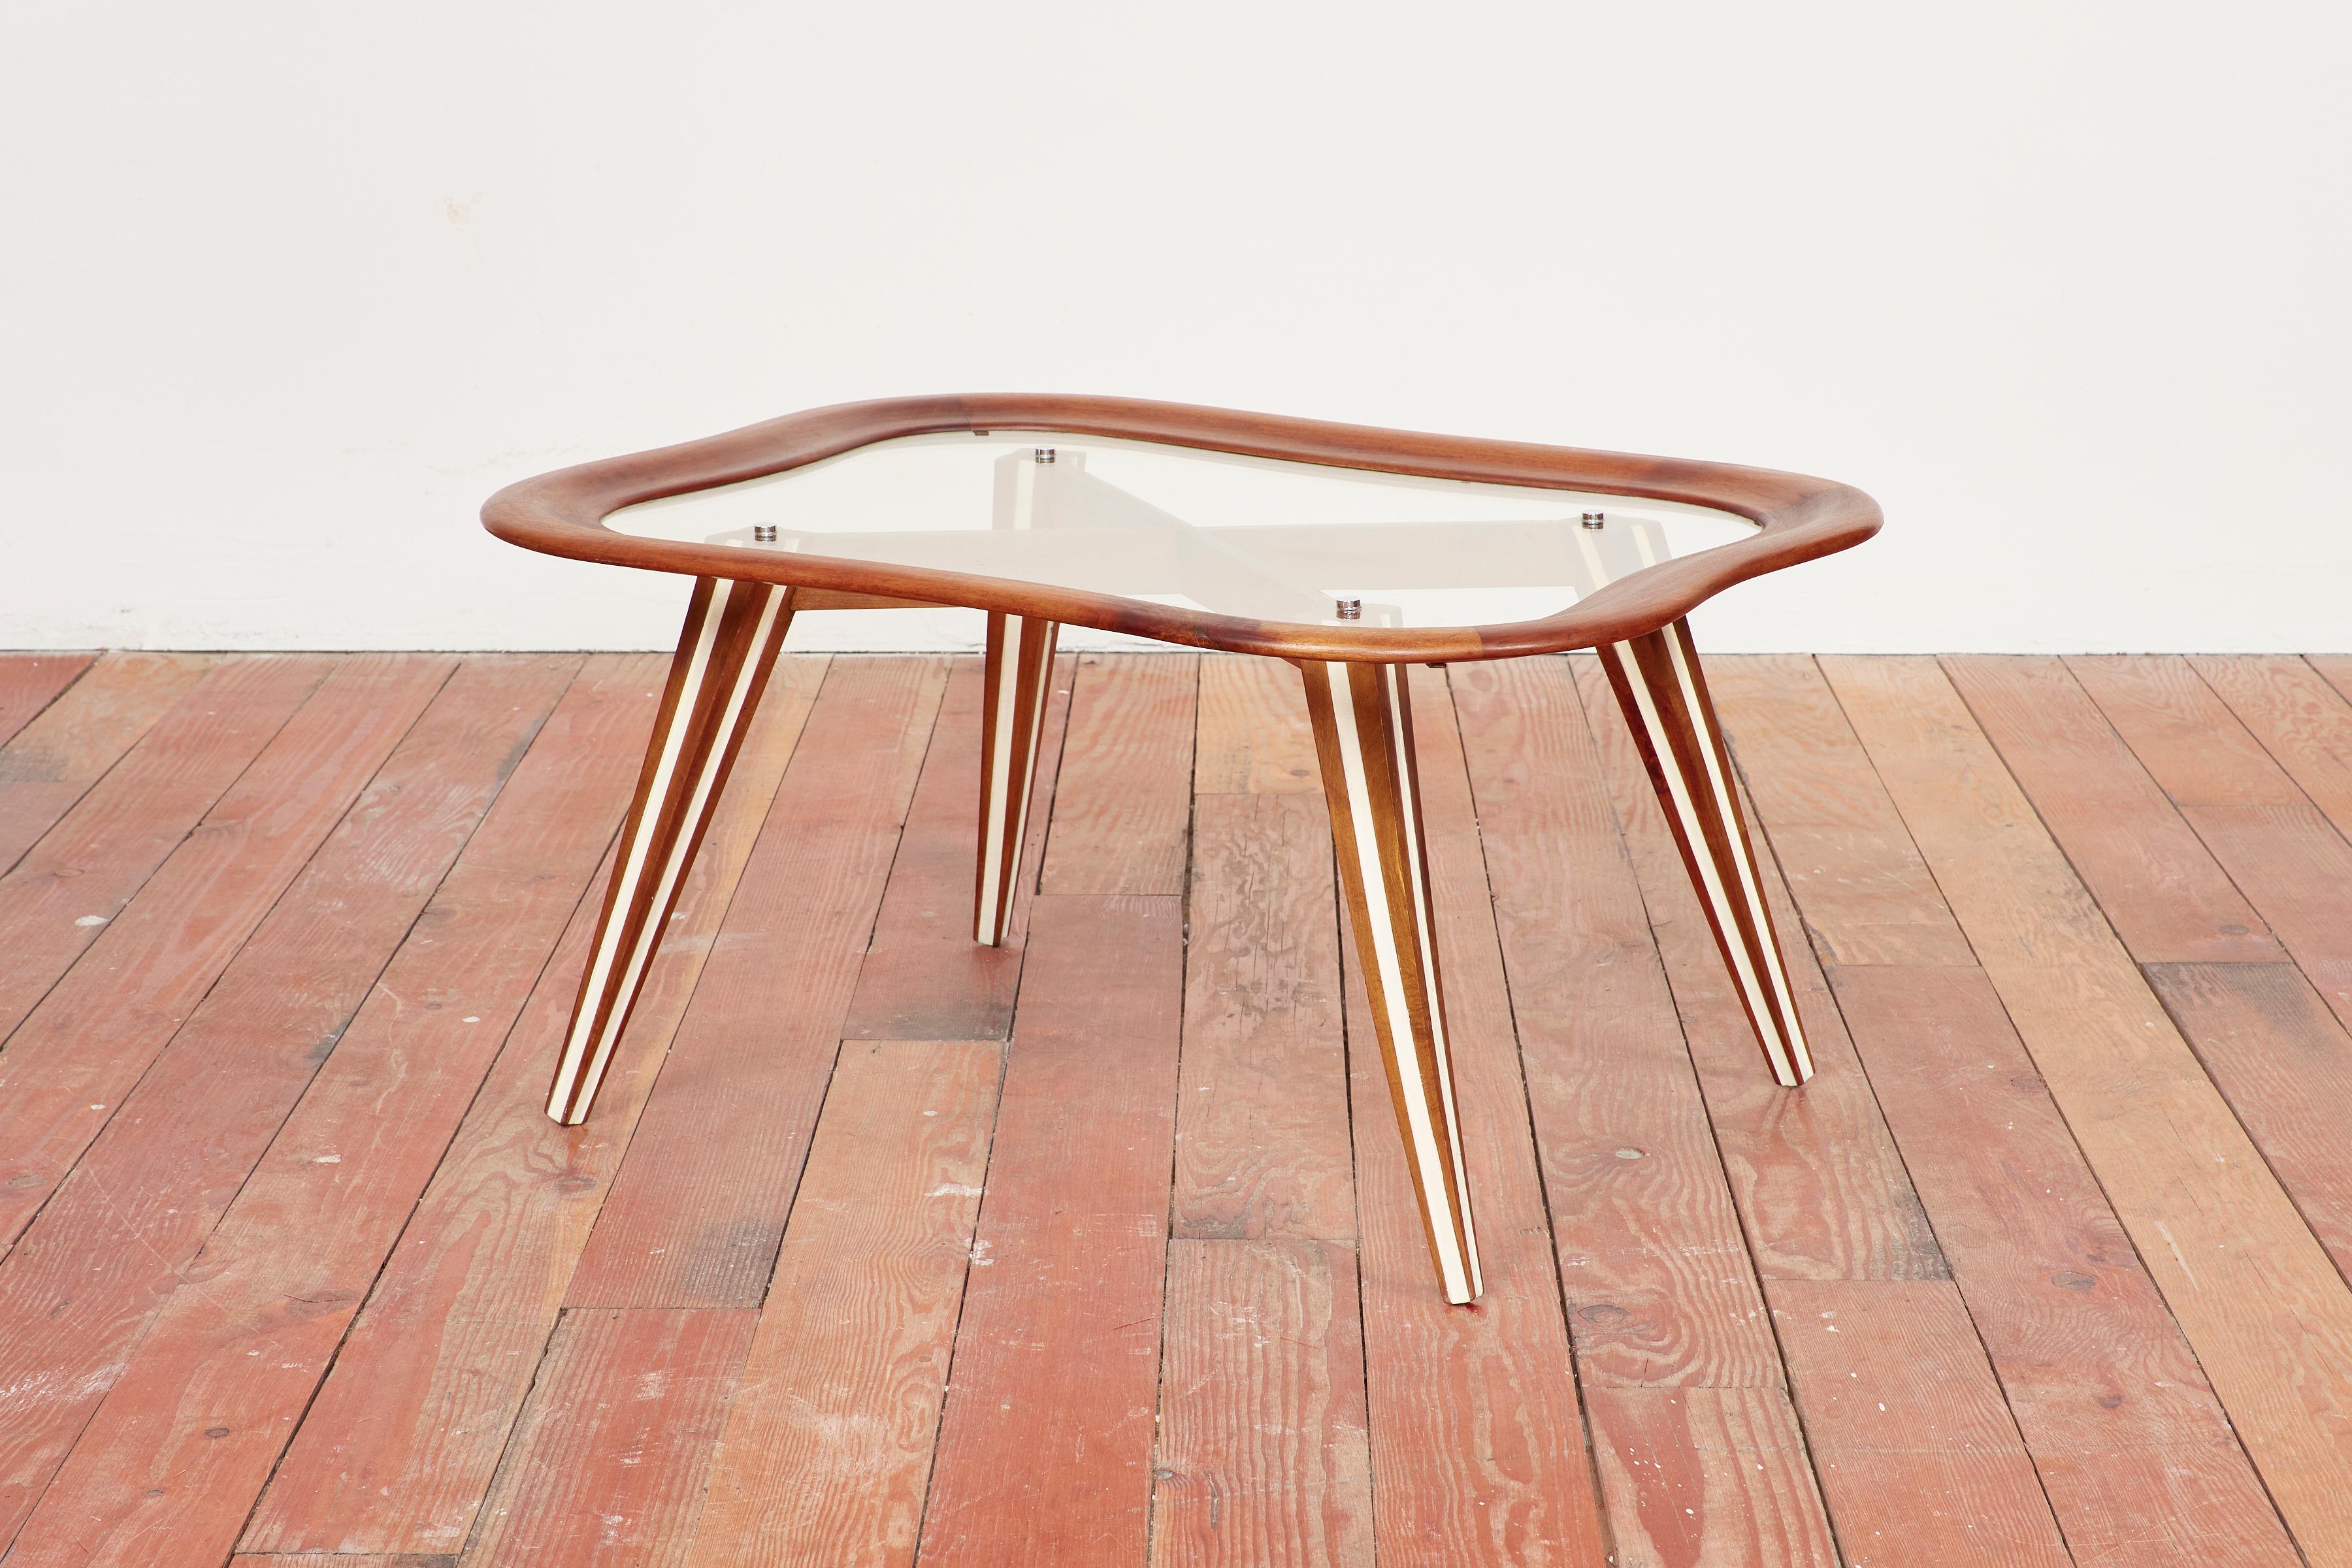 Italian side table by designer Chrissotti Filippo 
Amoeba shaped glass with wood frame and angular legs
Brass accents.
Excellent piece.